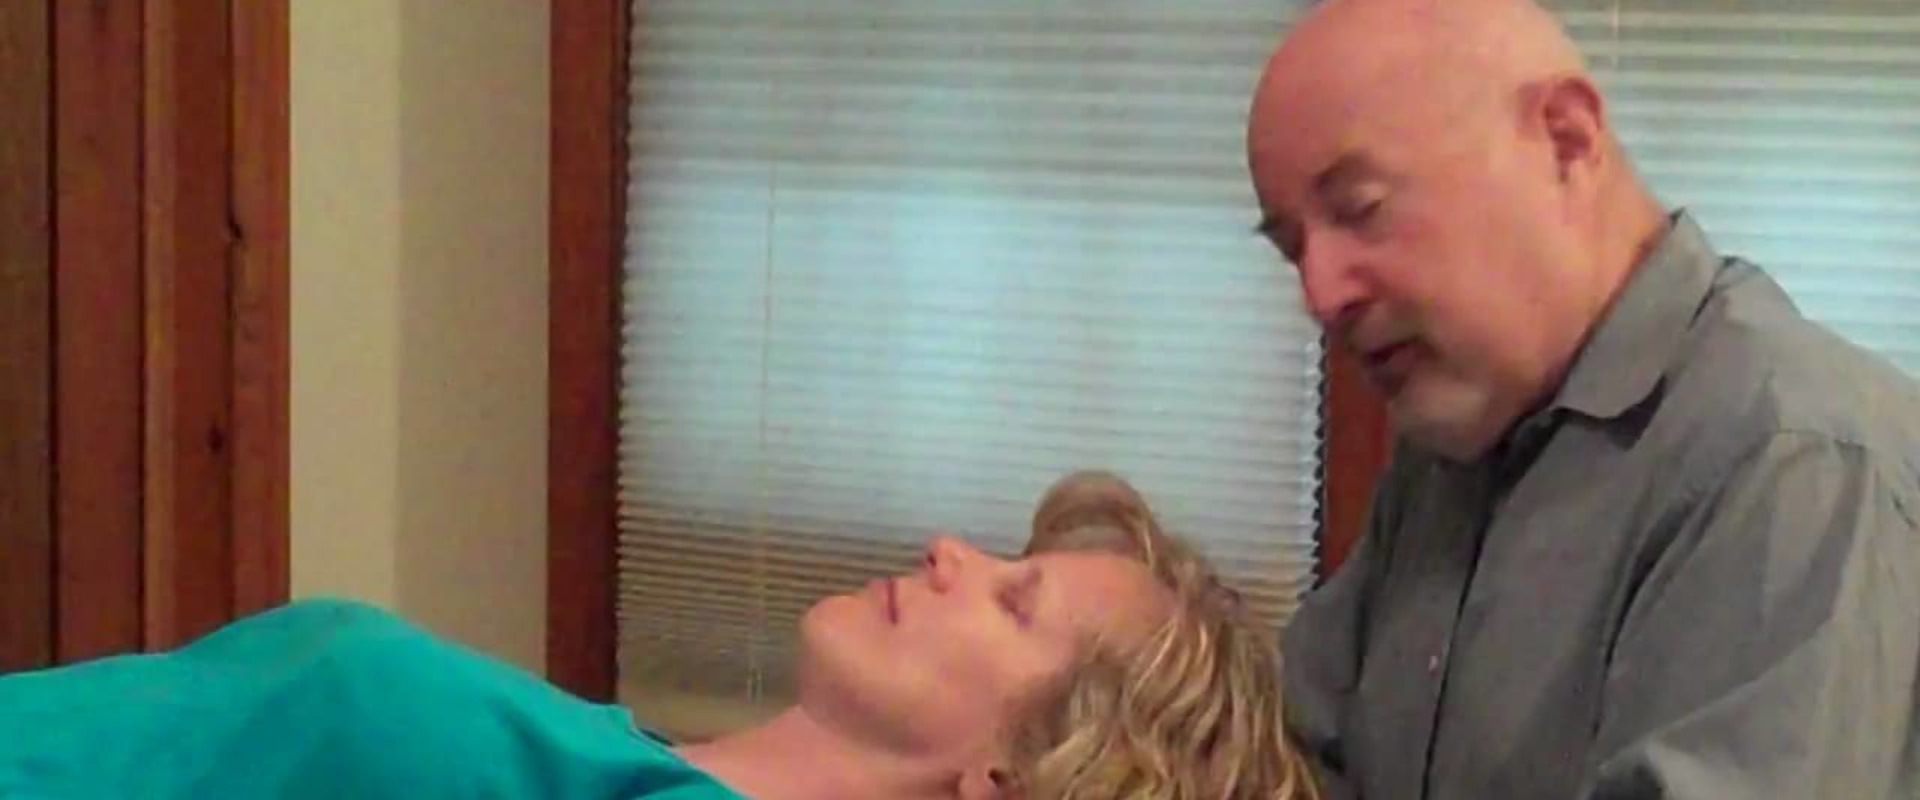 Craniosacral Therapy for Headaches and Migraines